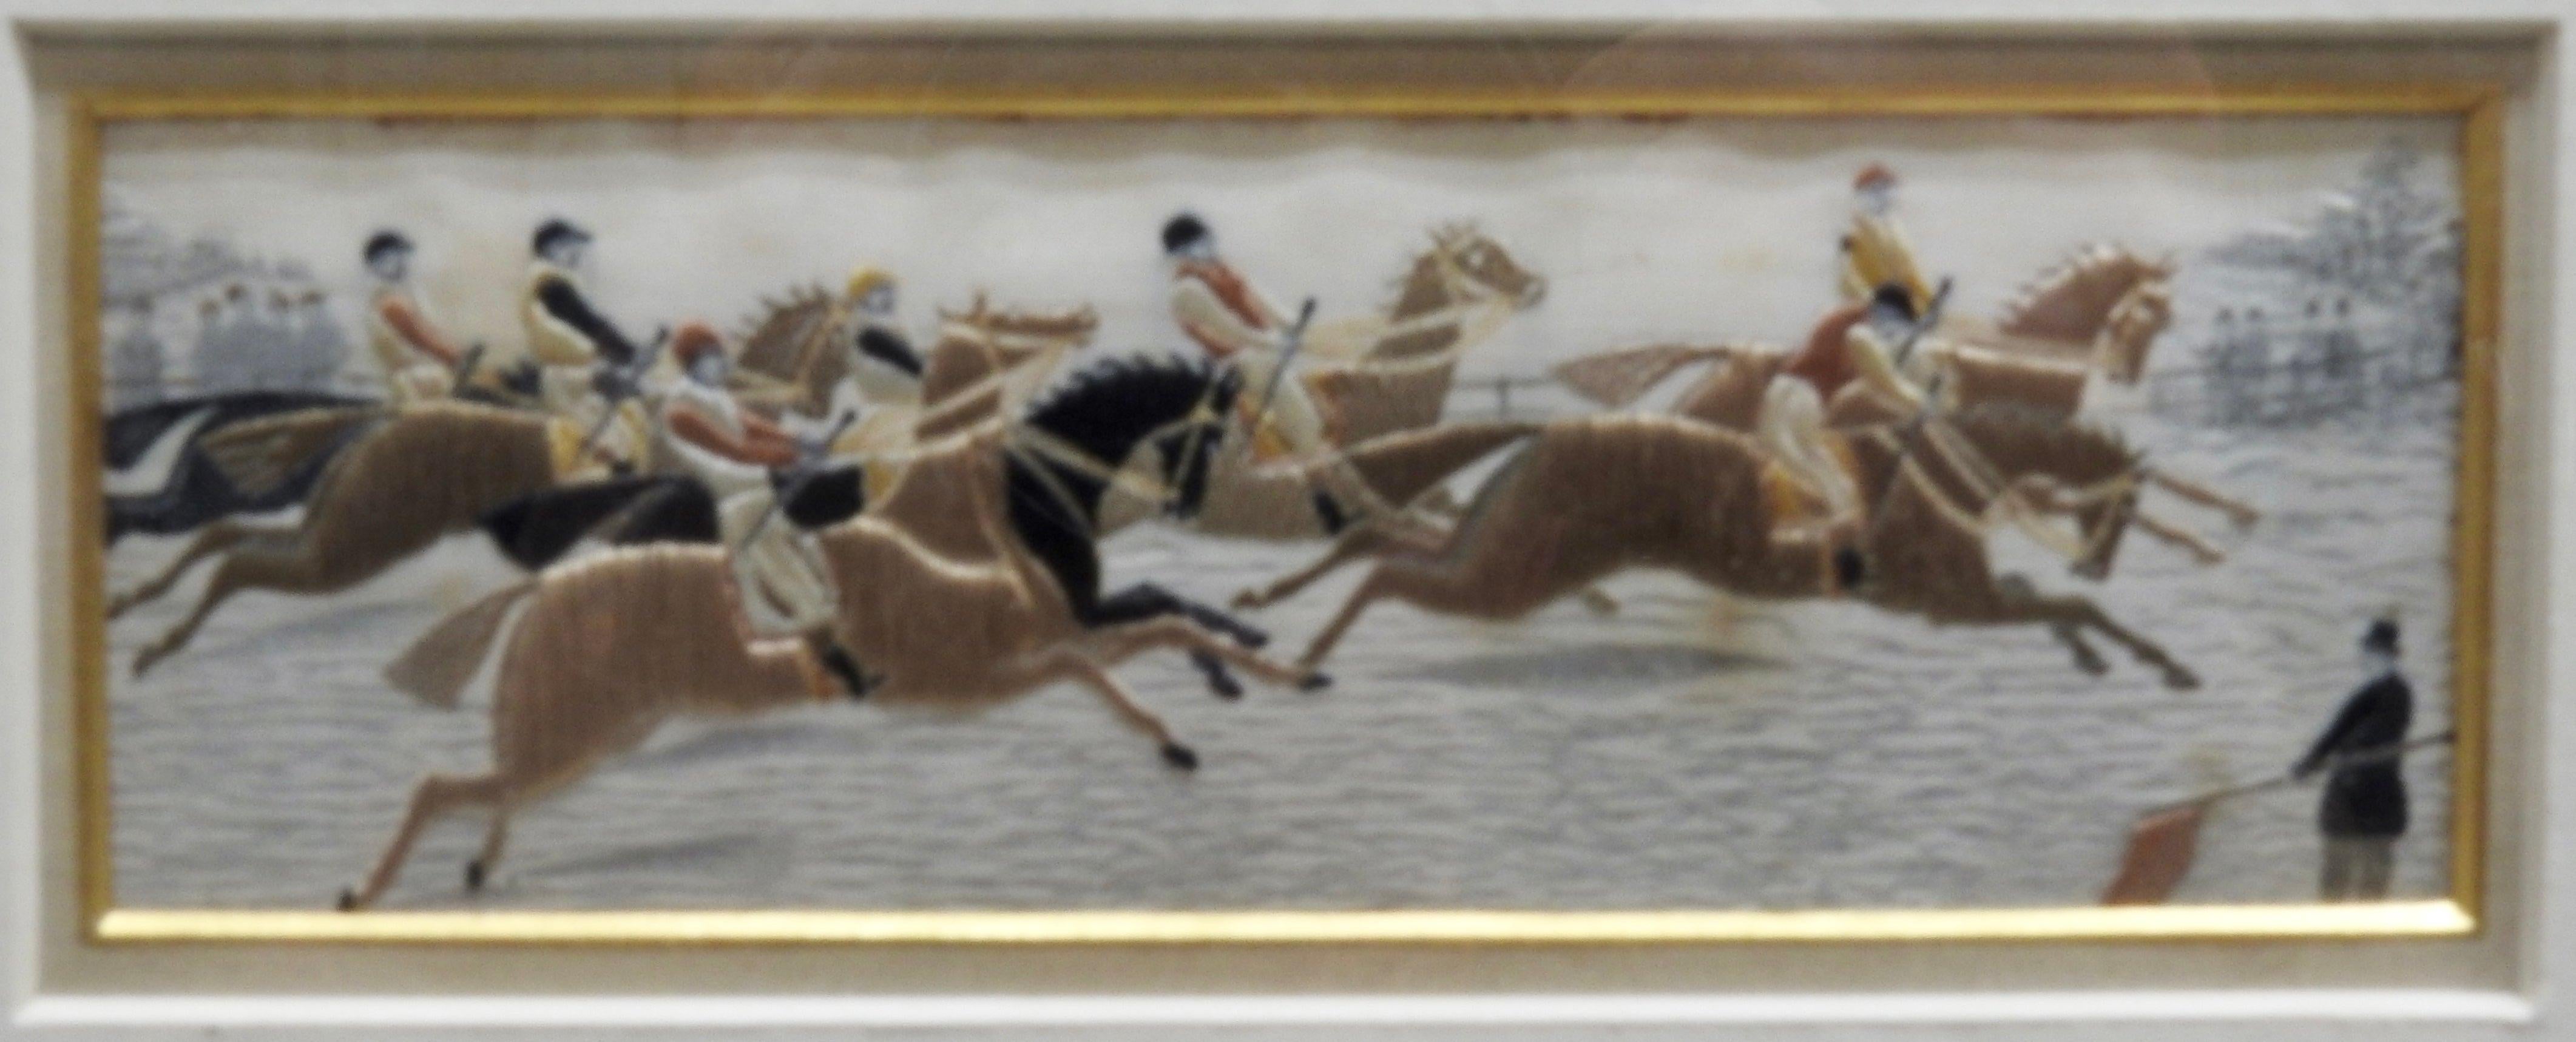 Collection of Thomas Stevens of Coventry woven pictures. Includes a series of horses in a set of five scenes, done in a Stevengraph. Beautiful silk threading including gold threads. The series is framed with a mat with gold around each. The black